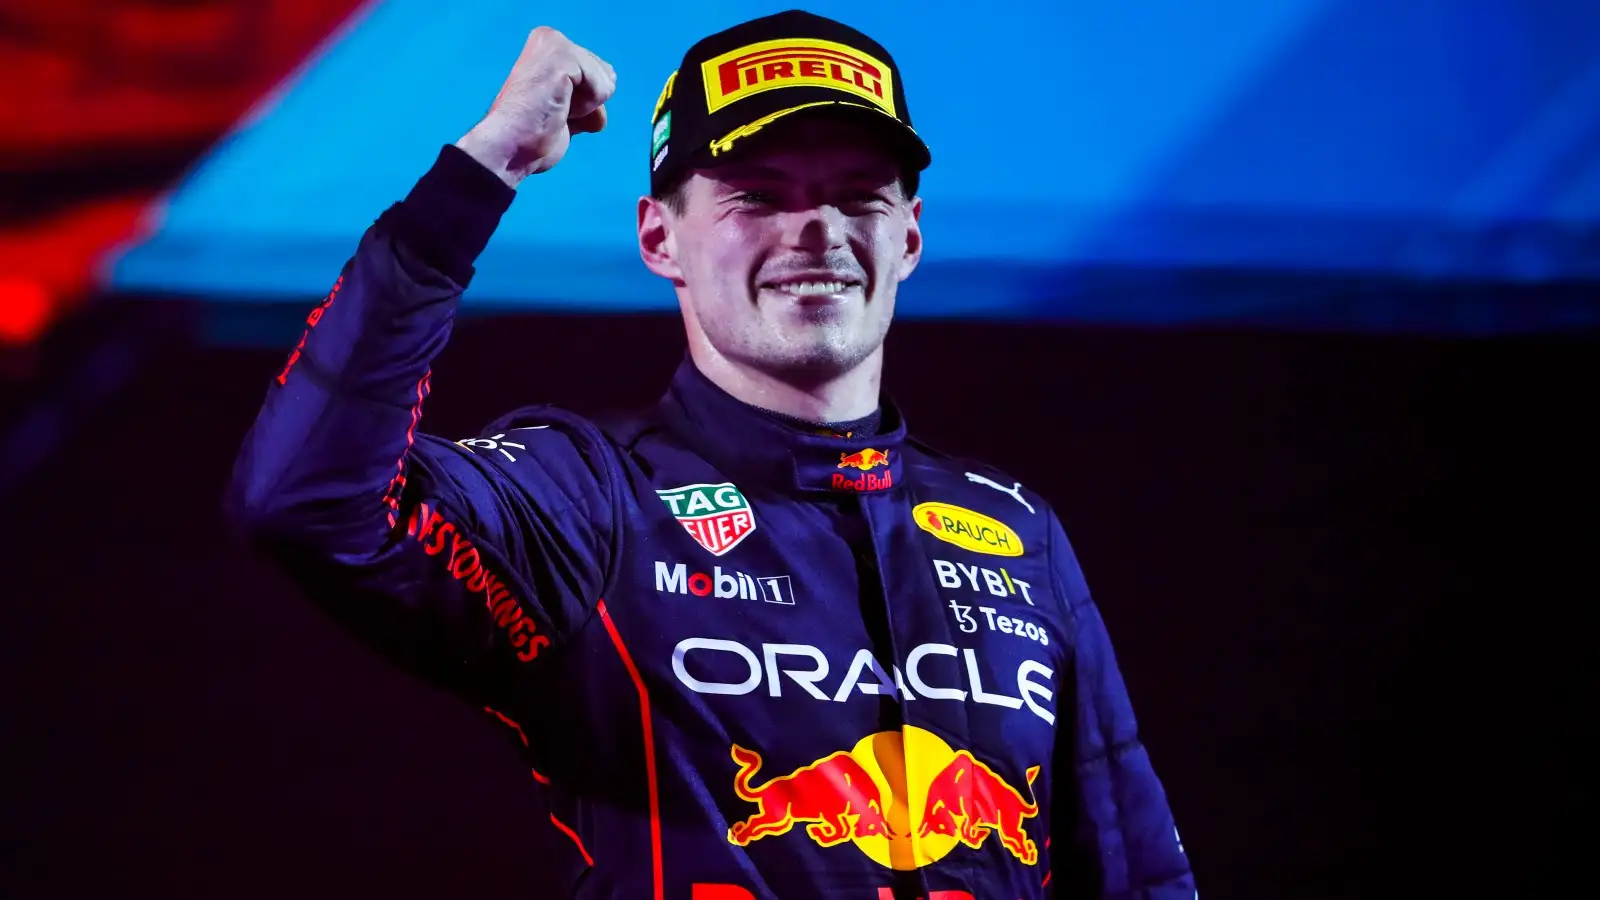 Max Verstappen, Red Bull, celebrates with his arm raised. Saudi Arabia, March 2022.